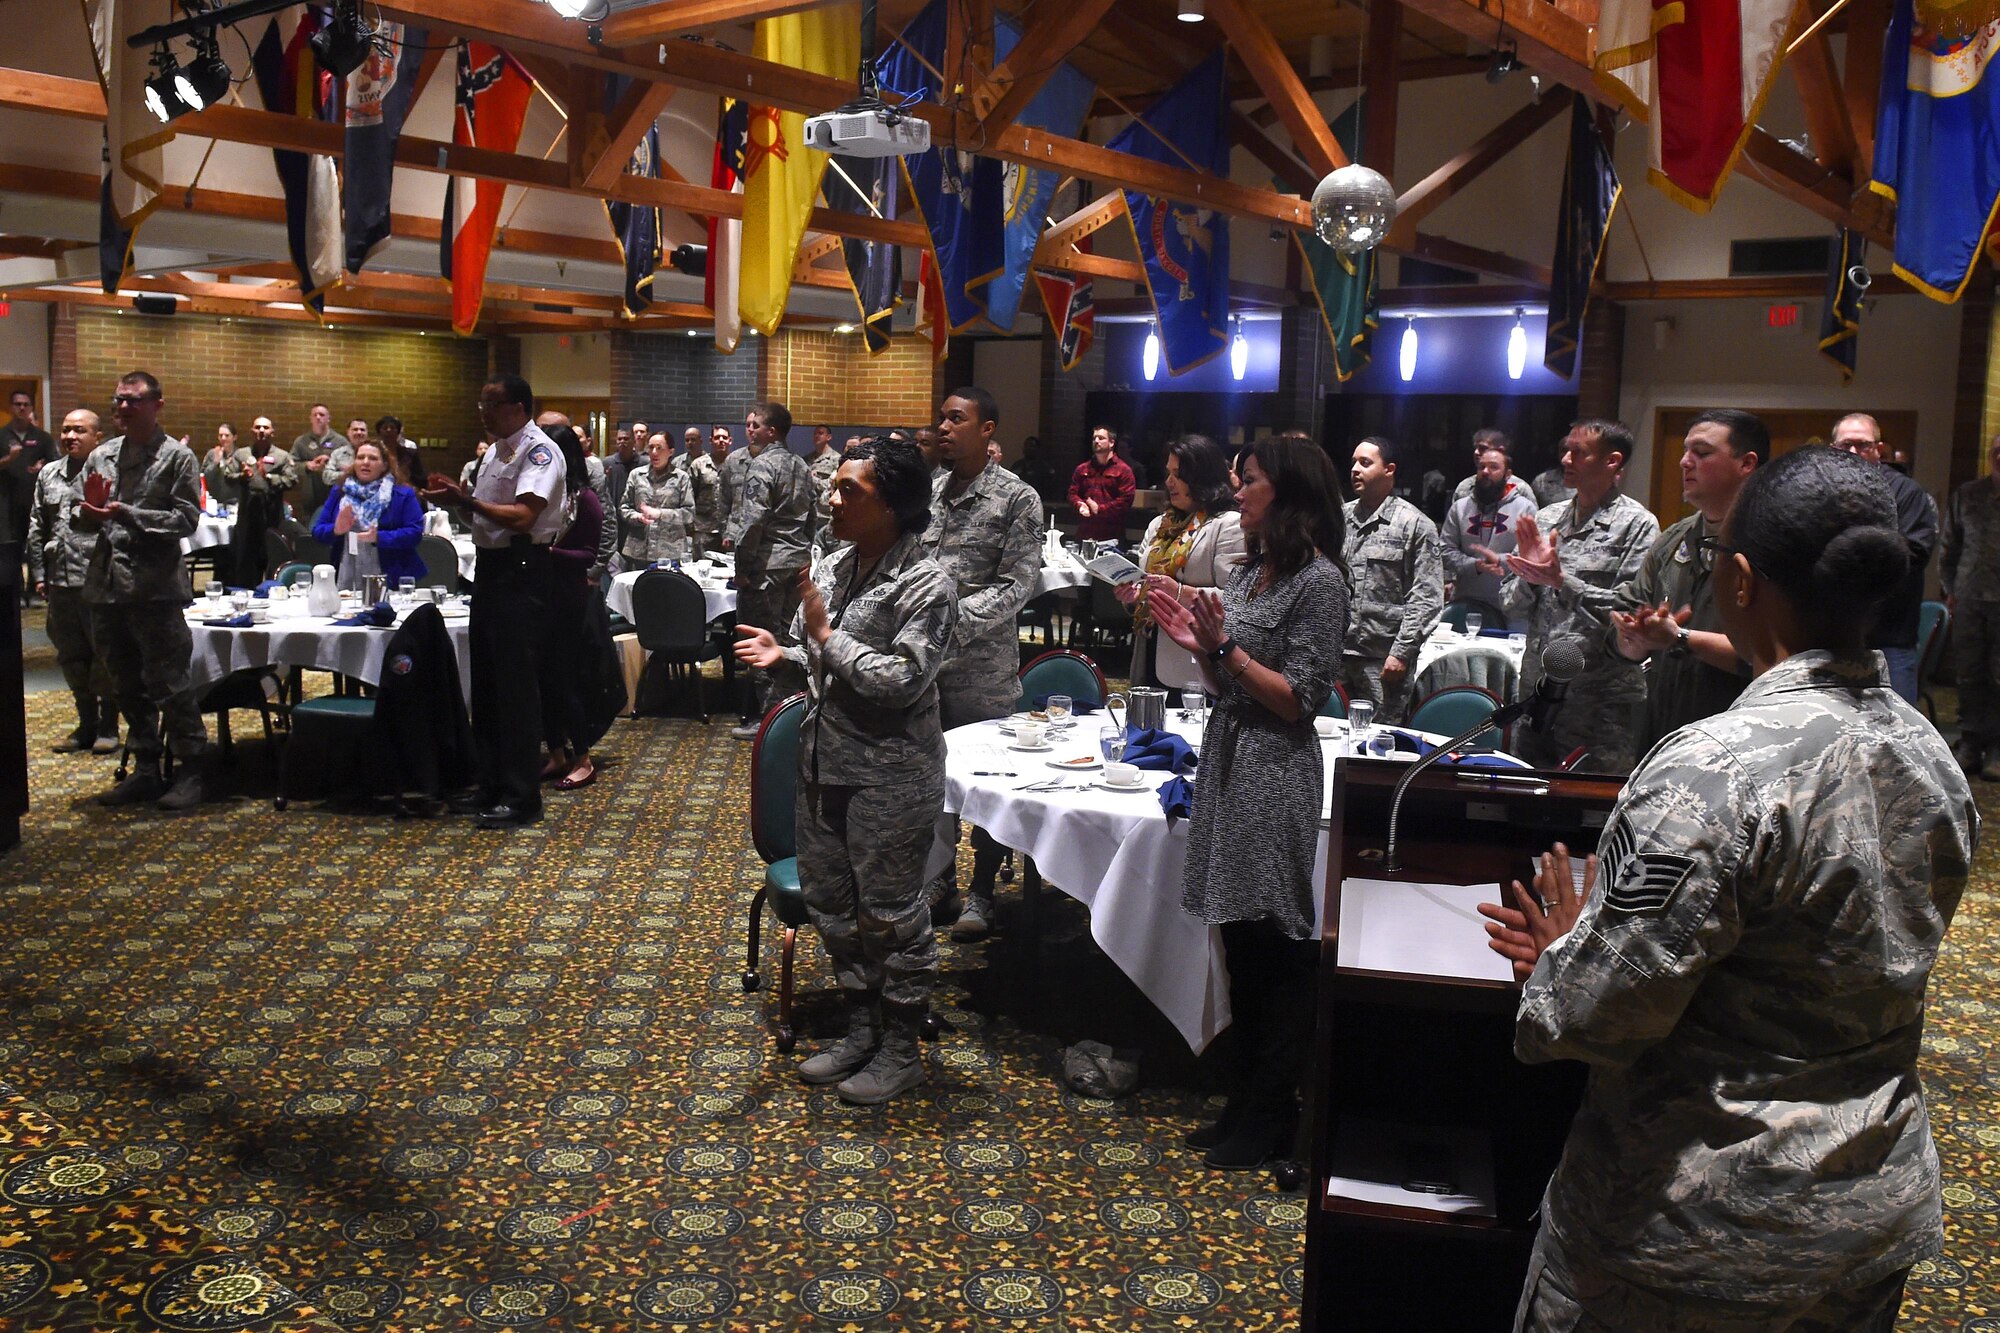 Members of Team McChord applaude the 2016 62nd Airlift Wing Annual Award winners Jan. 27, 2017 at Joint Base Lewis McChord, Wash. All award nominnes were recognized during the 2016 62nd Airlift Wing Annual Award breakfast. (U.S. Air Force photo/Tech. Sgt. Timothy Chacon)